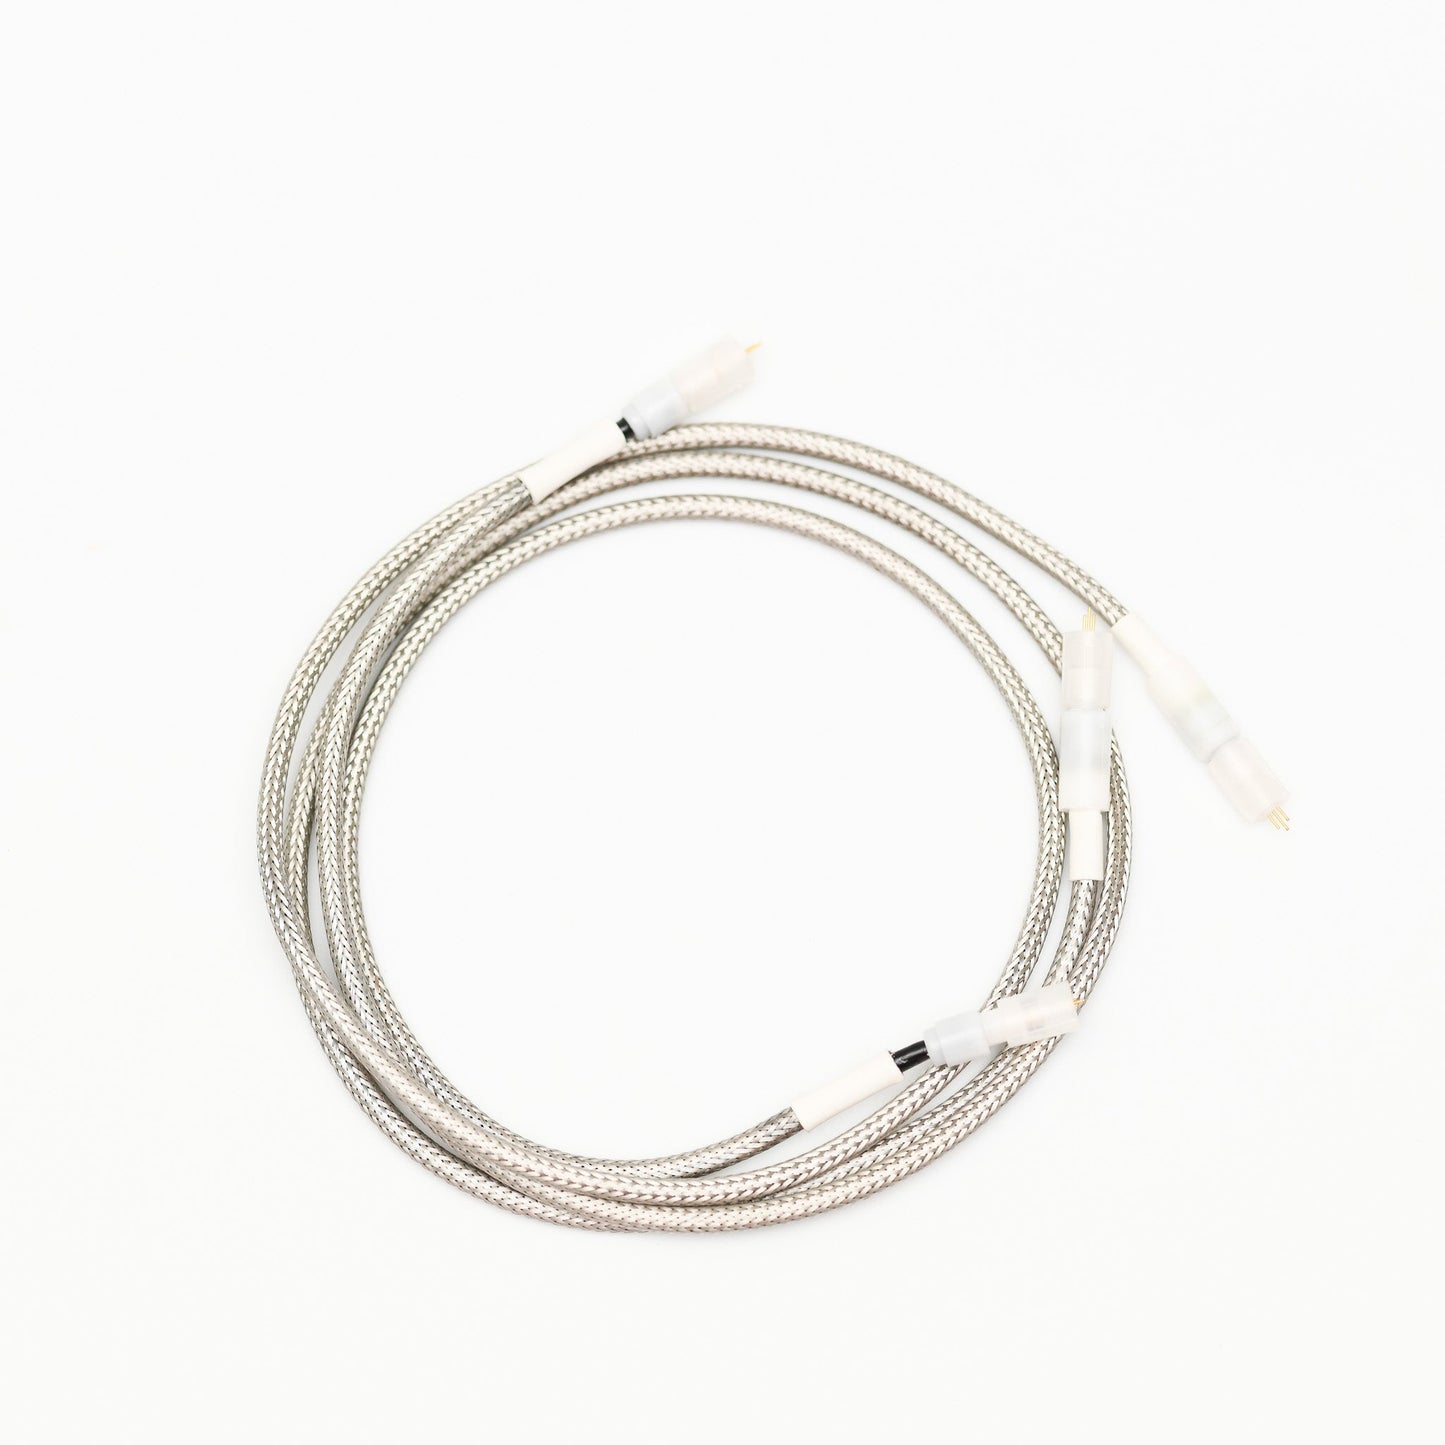 3 Channel Cable 335-000 With Spring